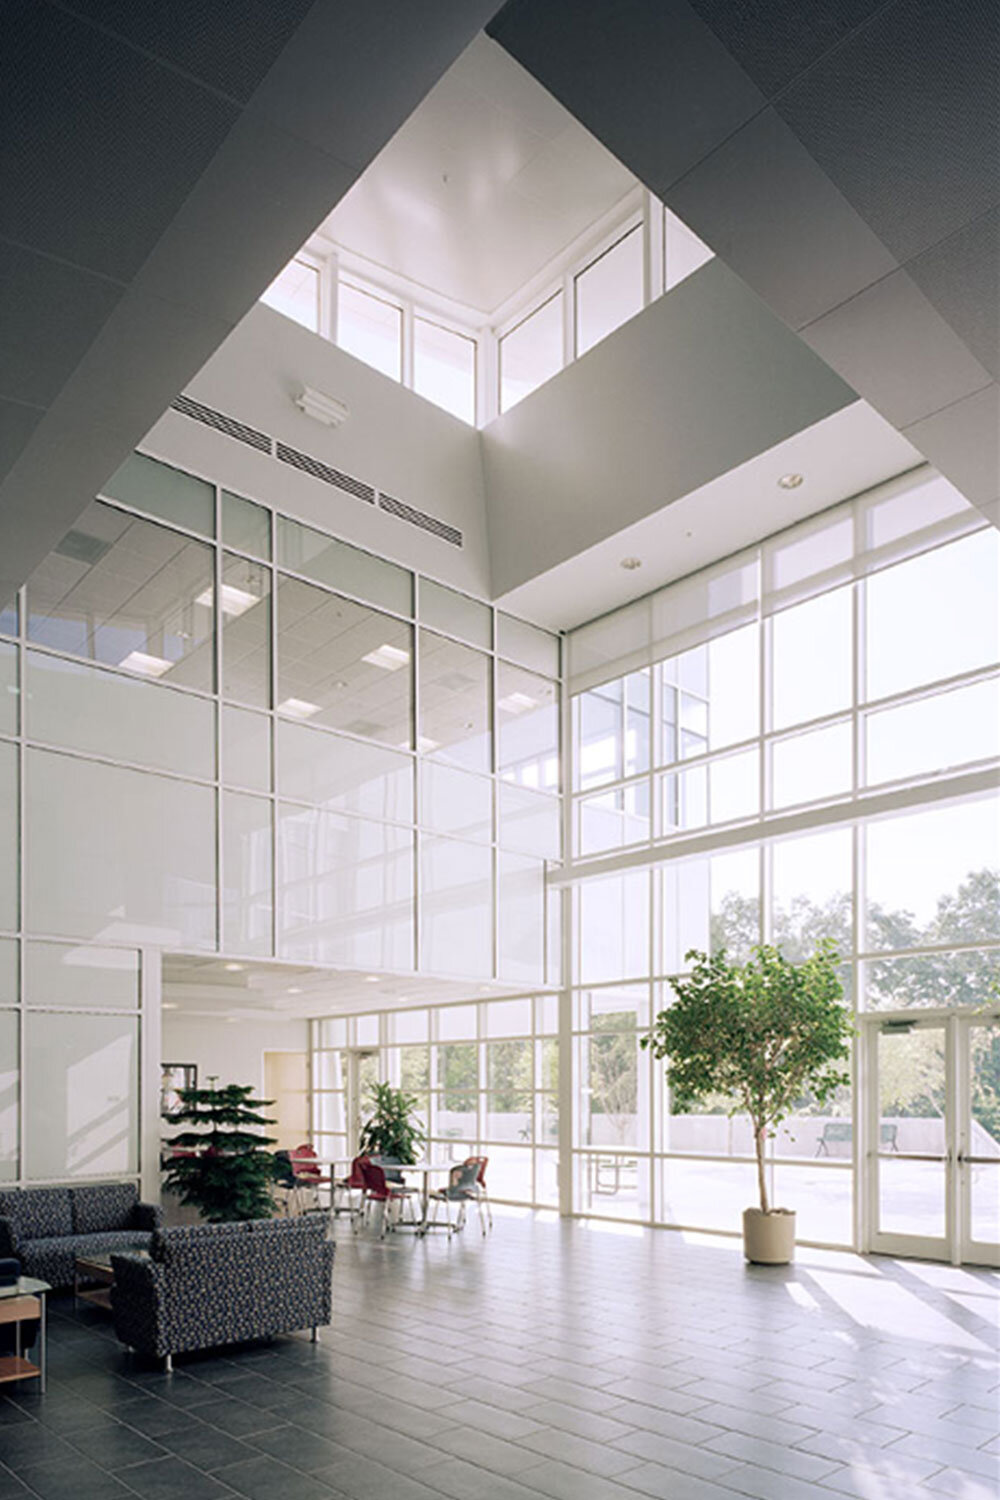 icd-high-performance-coatings-and-chemistries-construction-project-image-interior-white-wall-cladding-bight-white-opaci-coat-300-spandrel-glass.jpg